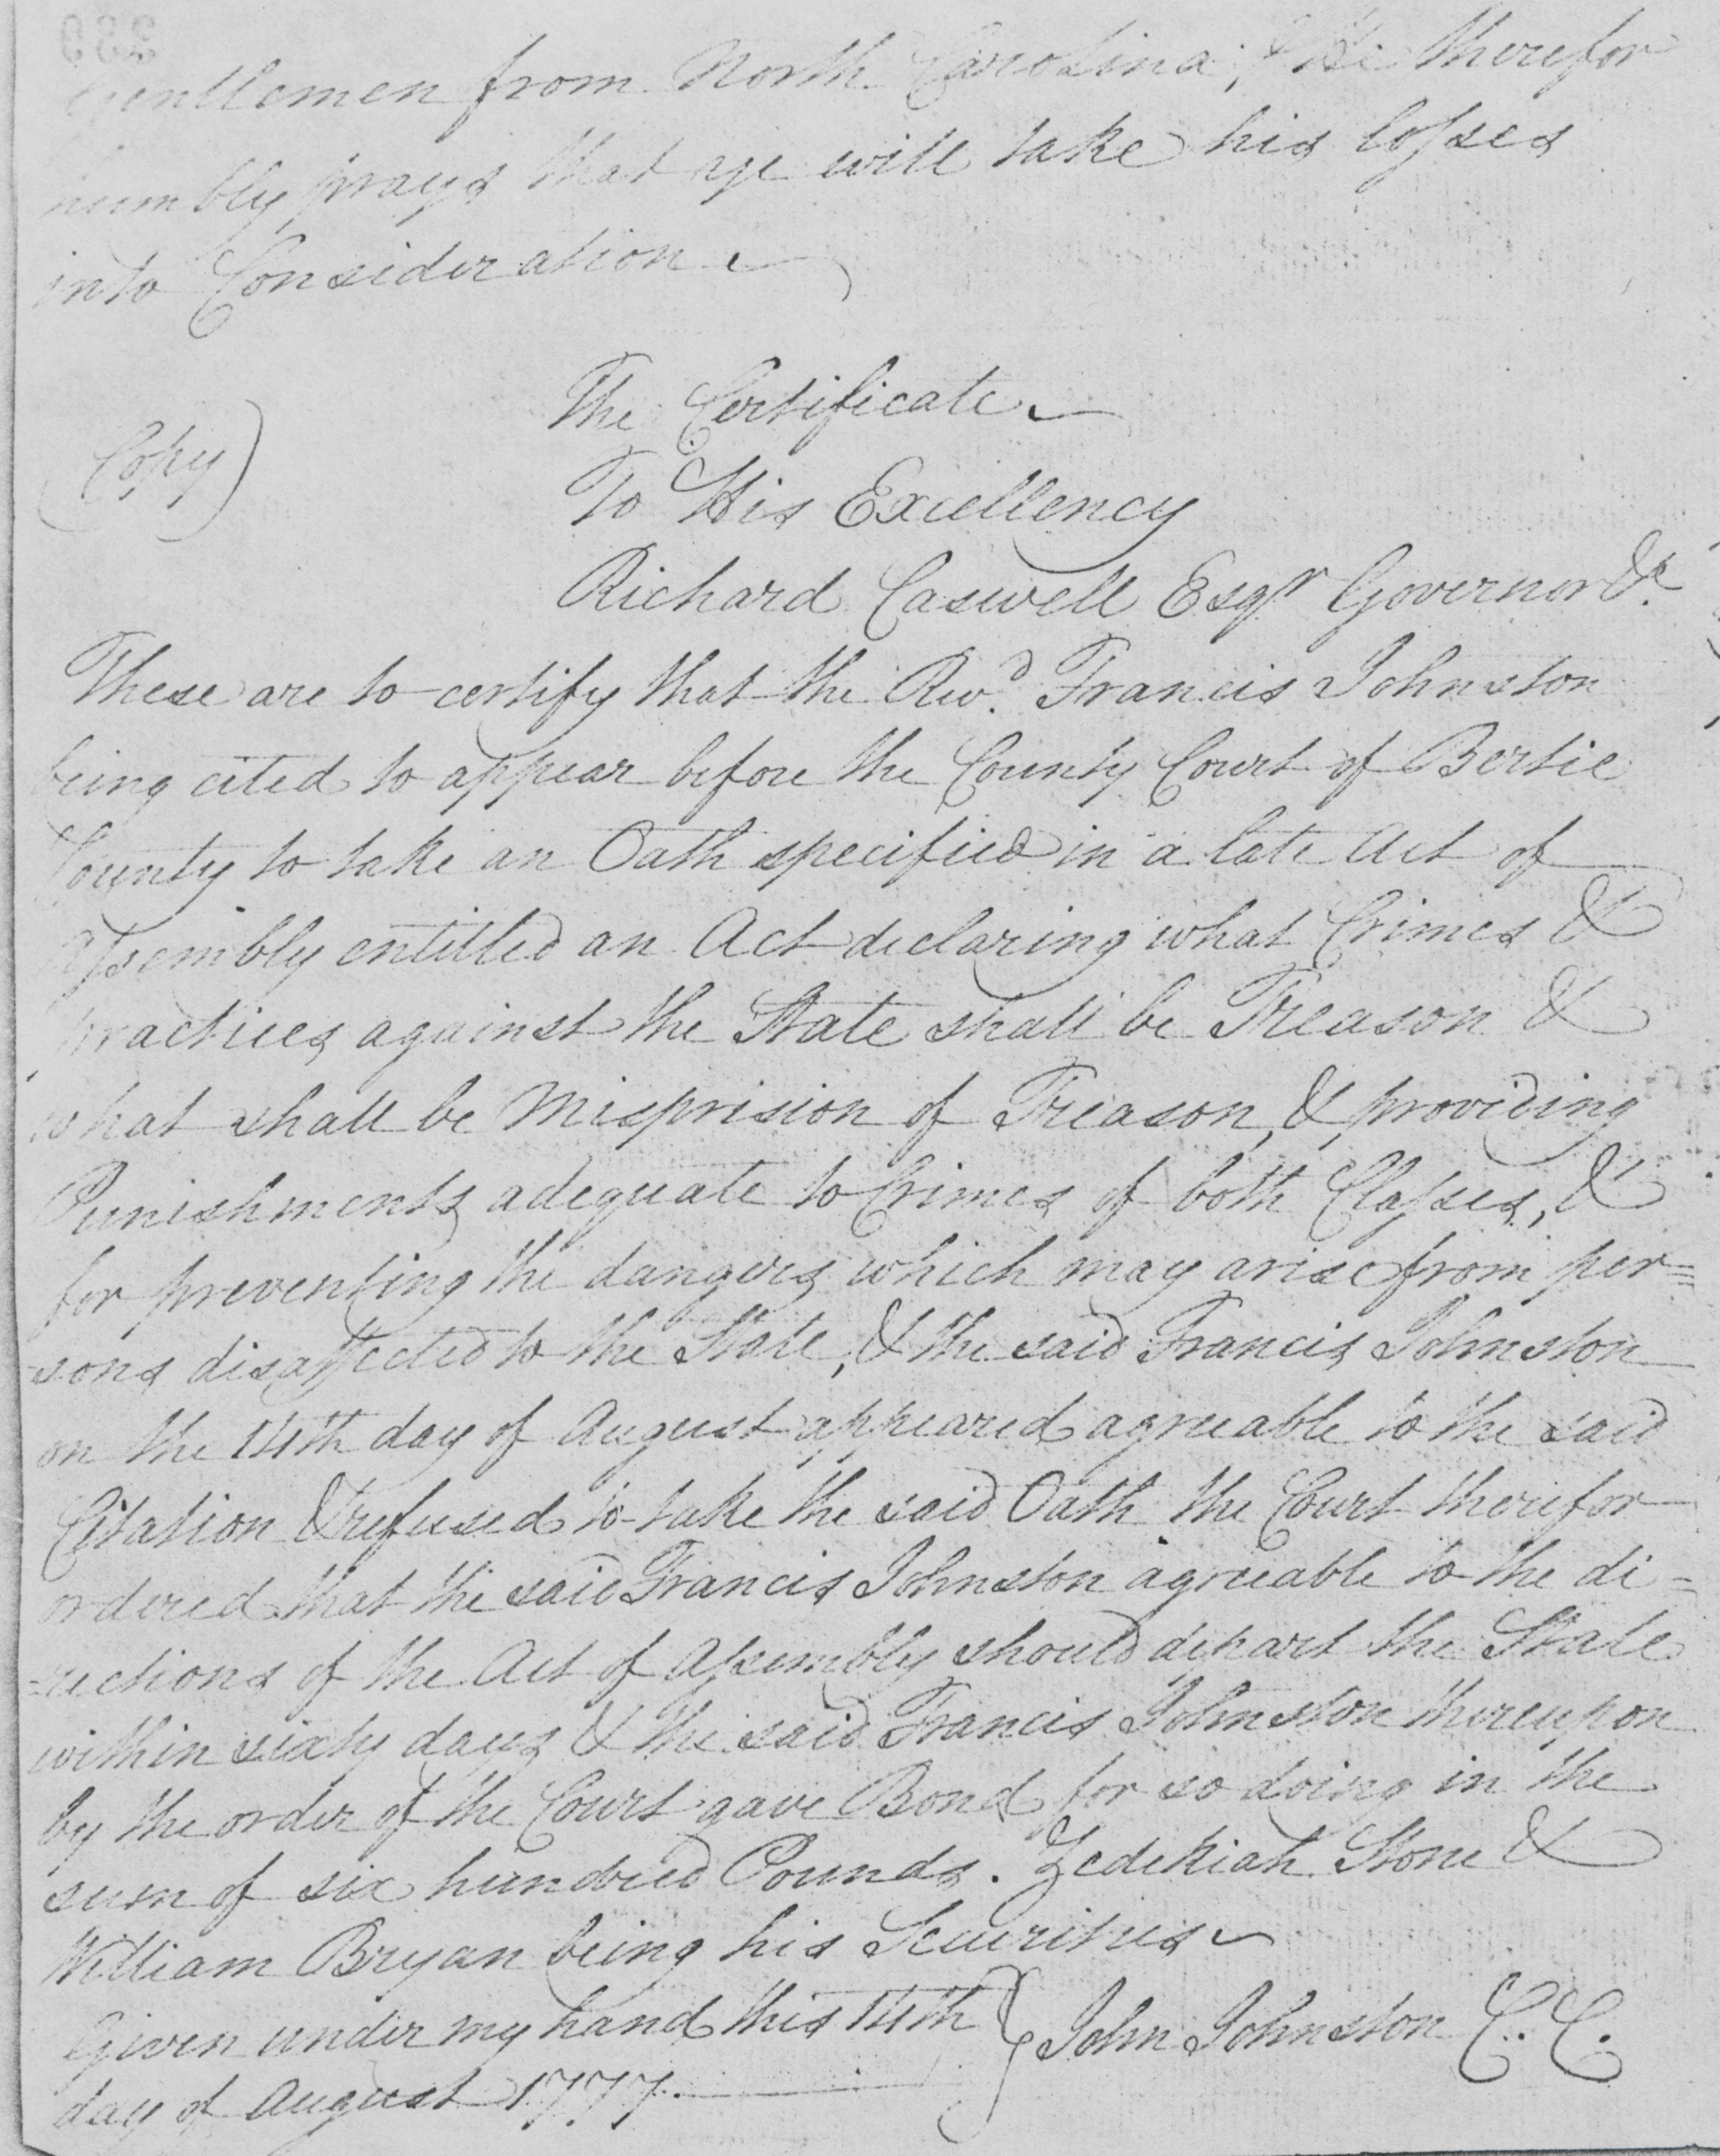 Claim from Francis Johnston to the Commissioners of American Claims, 29 May 1791, page 2